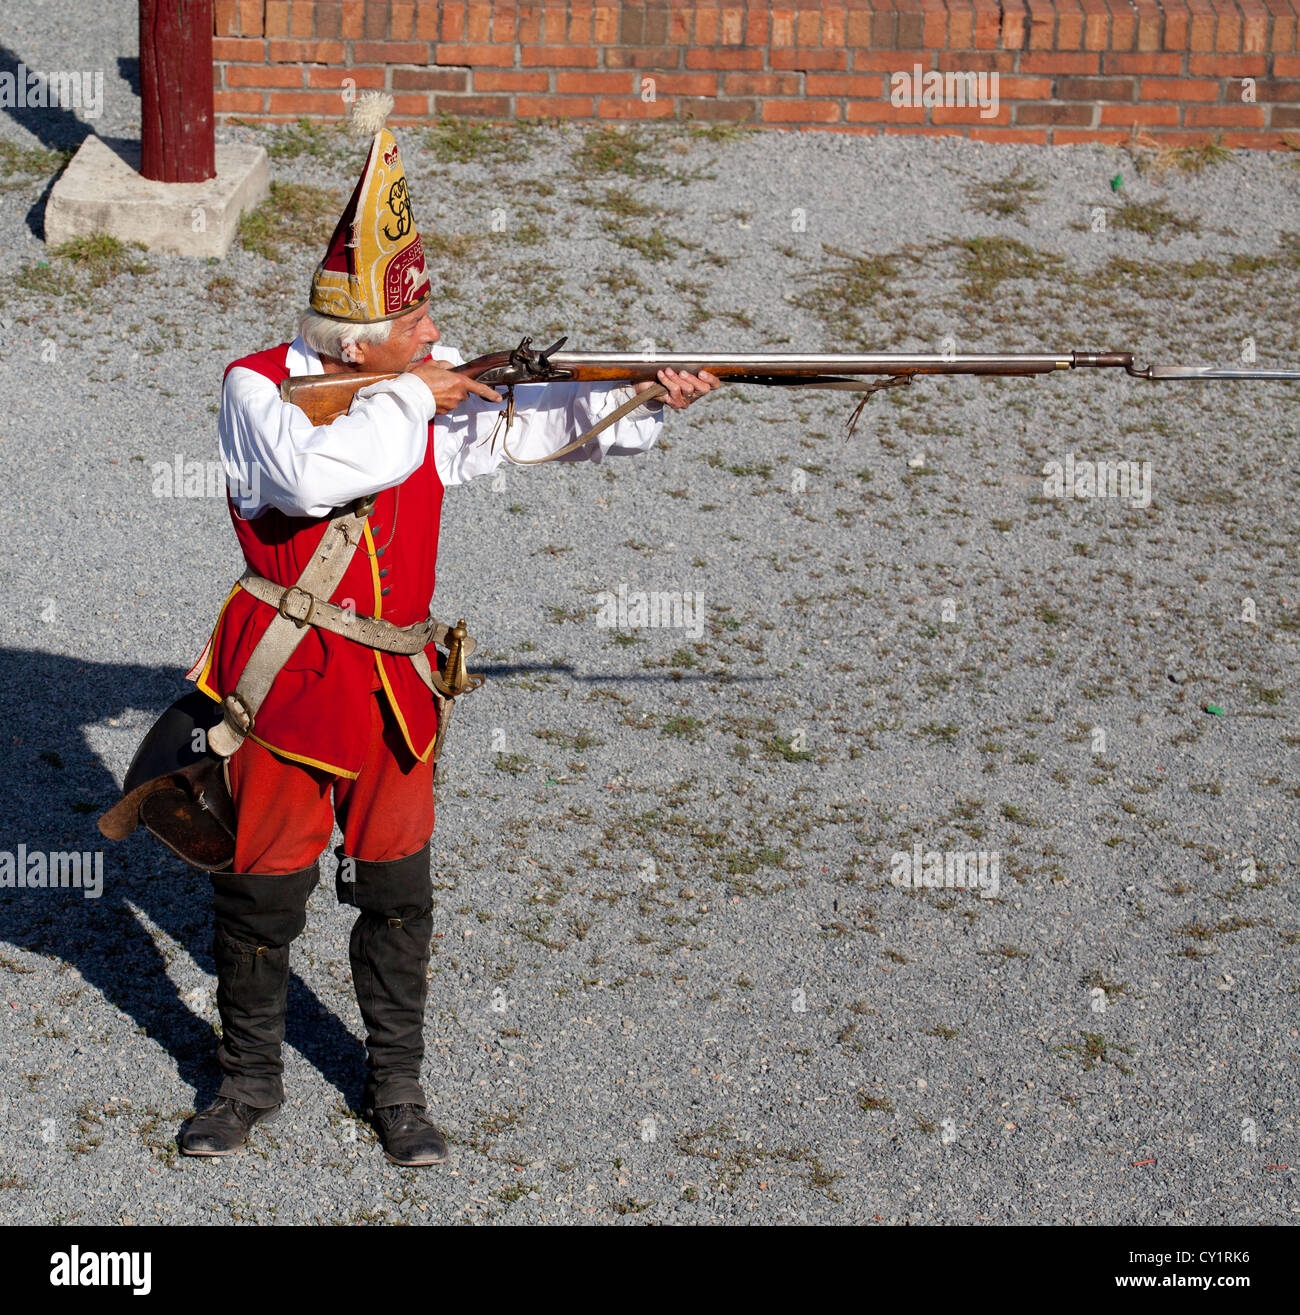 British Grenadier solder from the French and Indian War at Fort William Henry with his rifle at the ready. Stock Photo